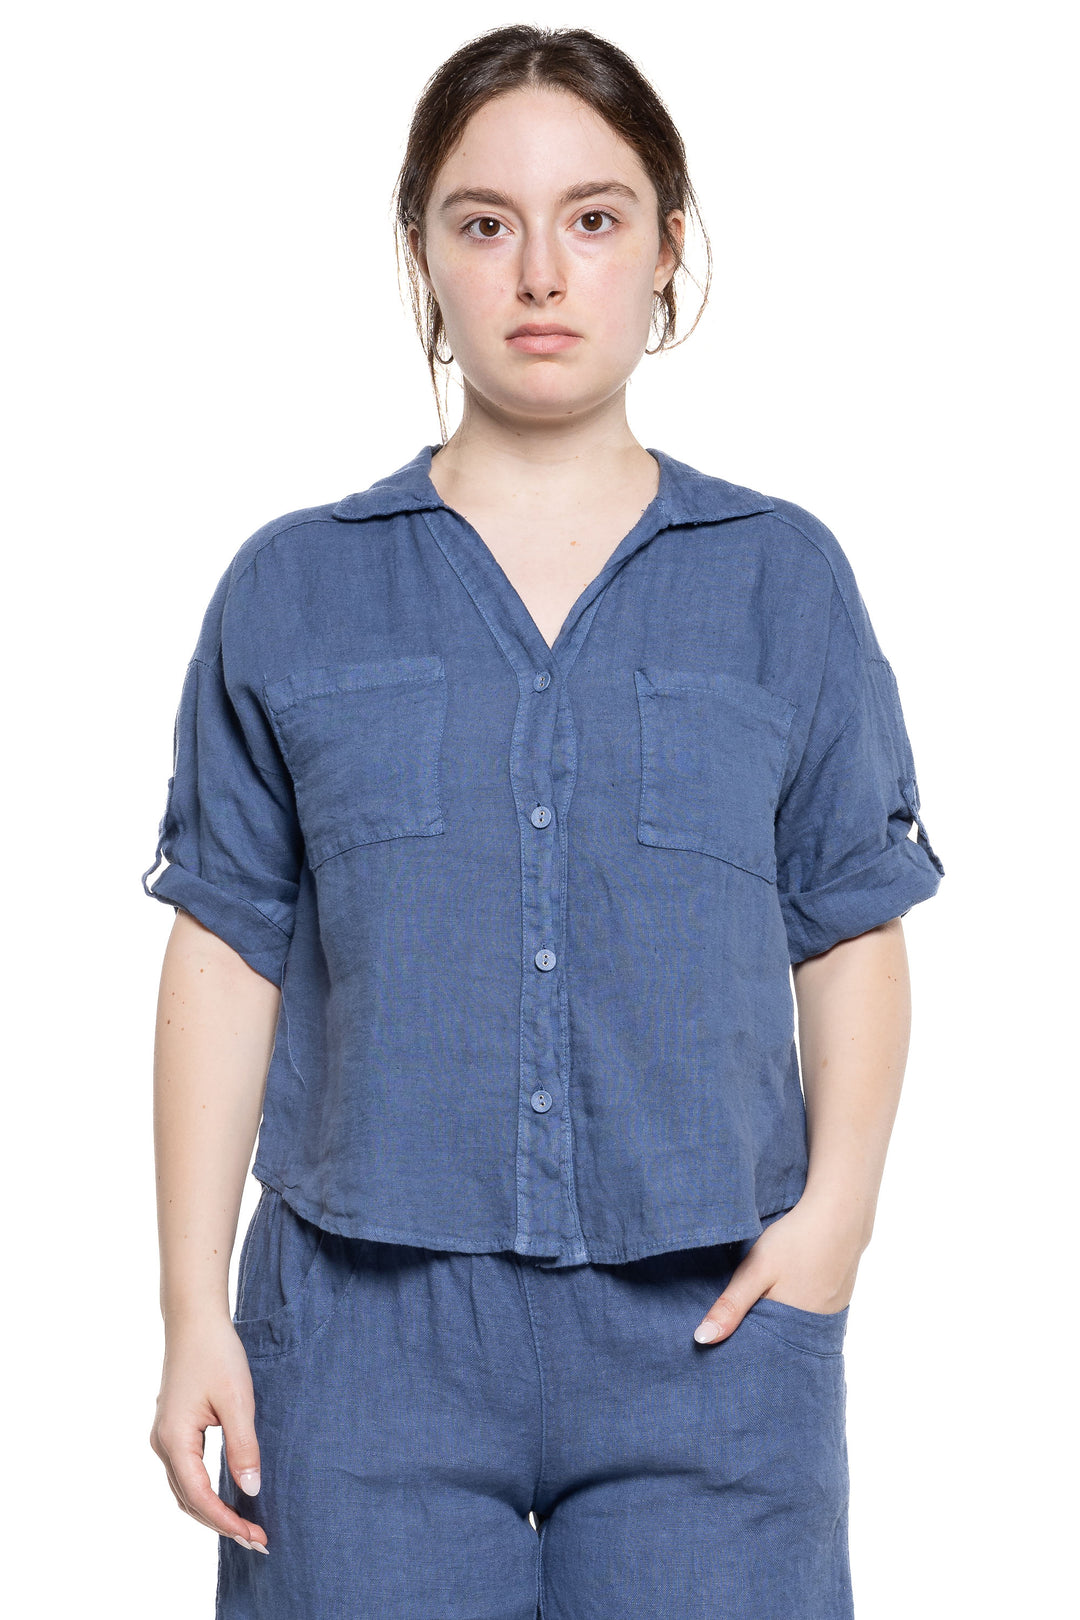 Etern Elle Summer 2024 As a linen blouse, this versatile and lightweight piece is perfect for the upcoming season. The front buttons, patch pockets and open classic collar add functionality and style.